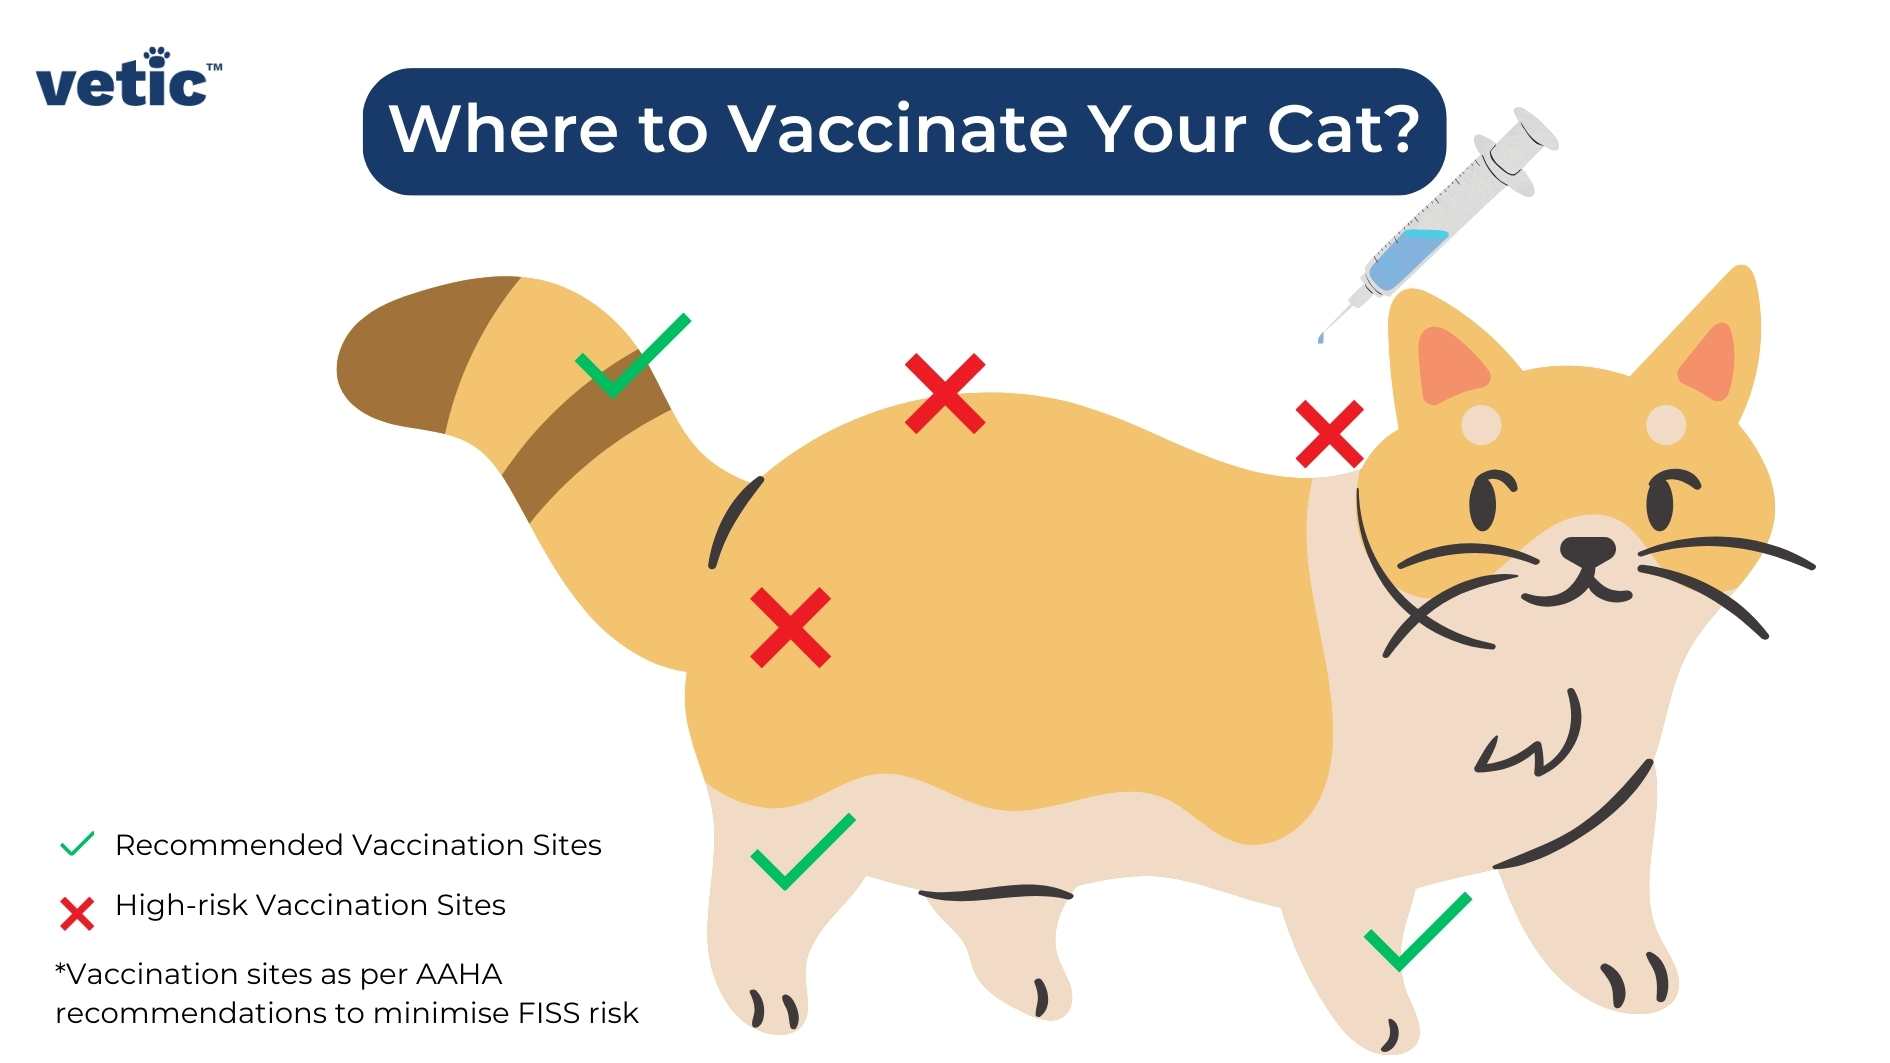 infographic on Where to vaccinate your cat to reduce the risk of feline injection-site sarcoma. The illustration shows a cat with tick marks on their legs, paws and tail - indicating that these are appropriate sites for injection. and cross marks on the nape of the neck, back and rump since these are high risk sites.